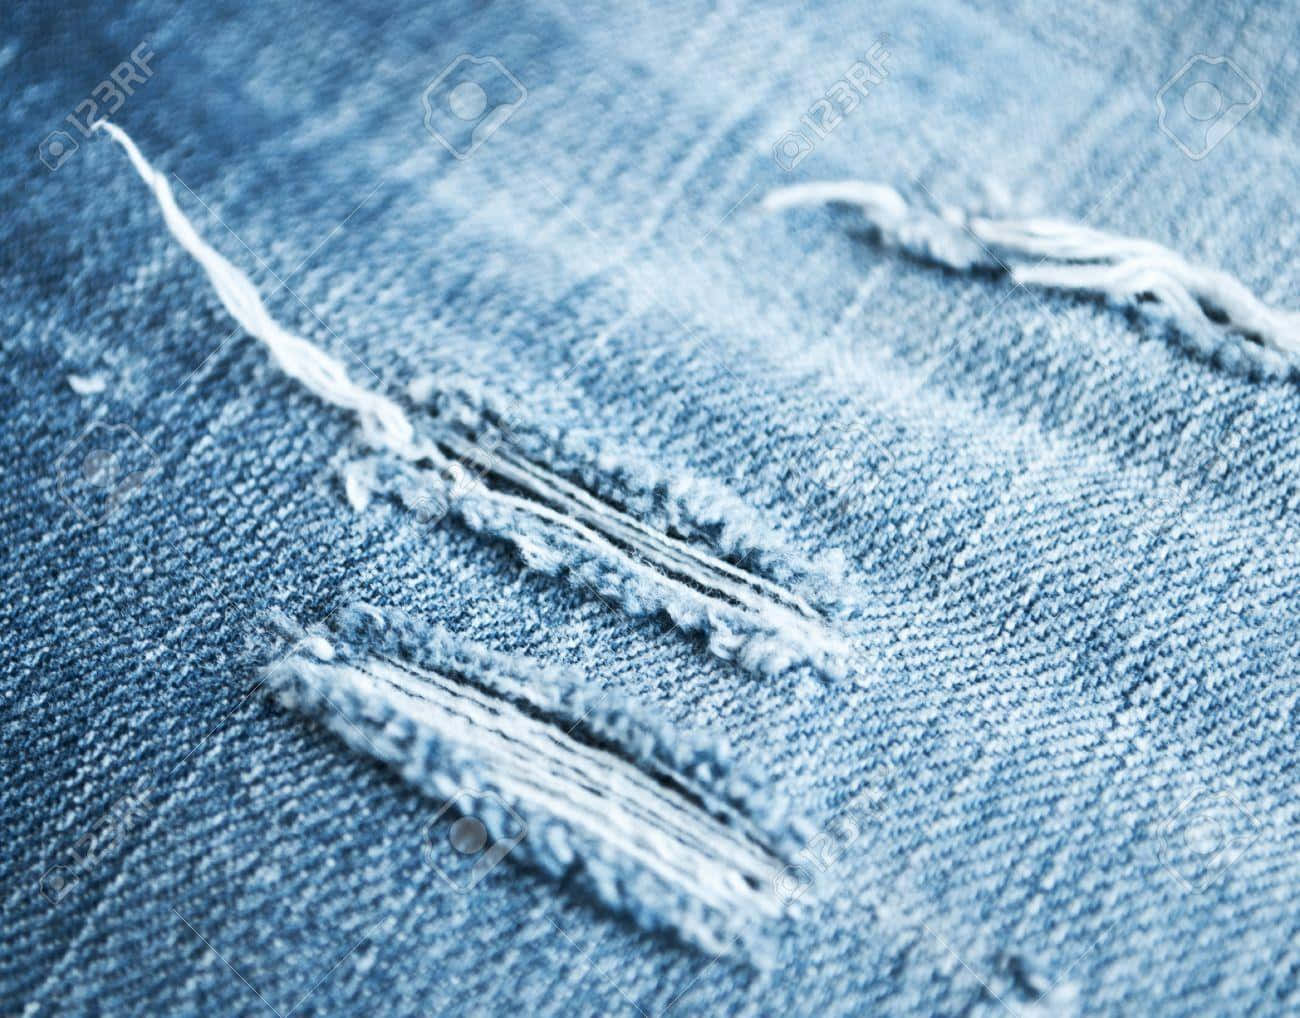 ripped jeans stock photo - e280932